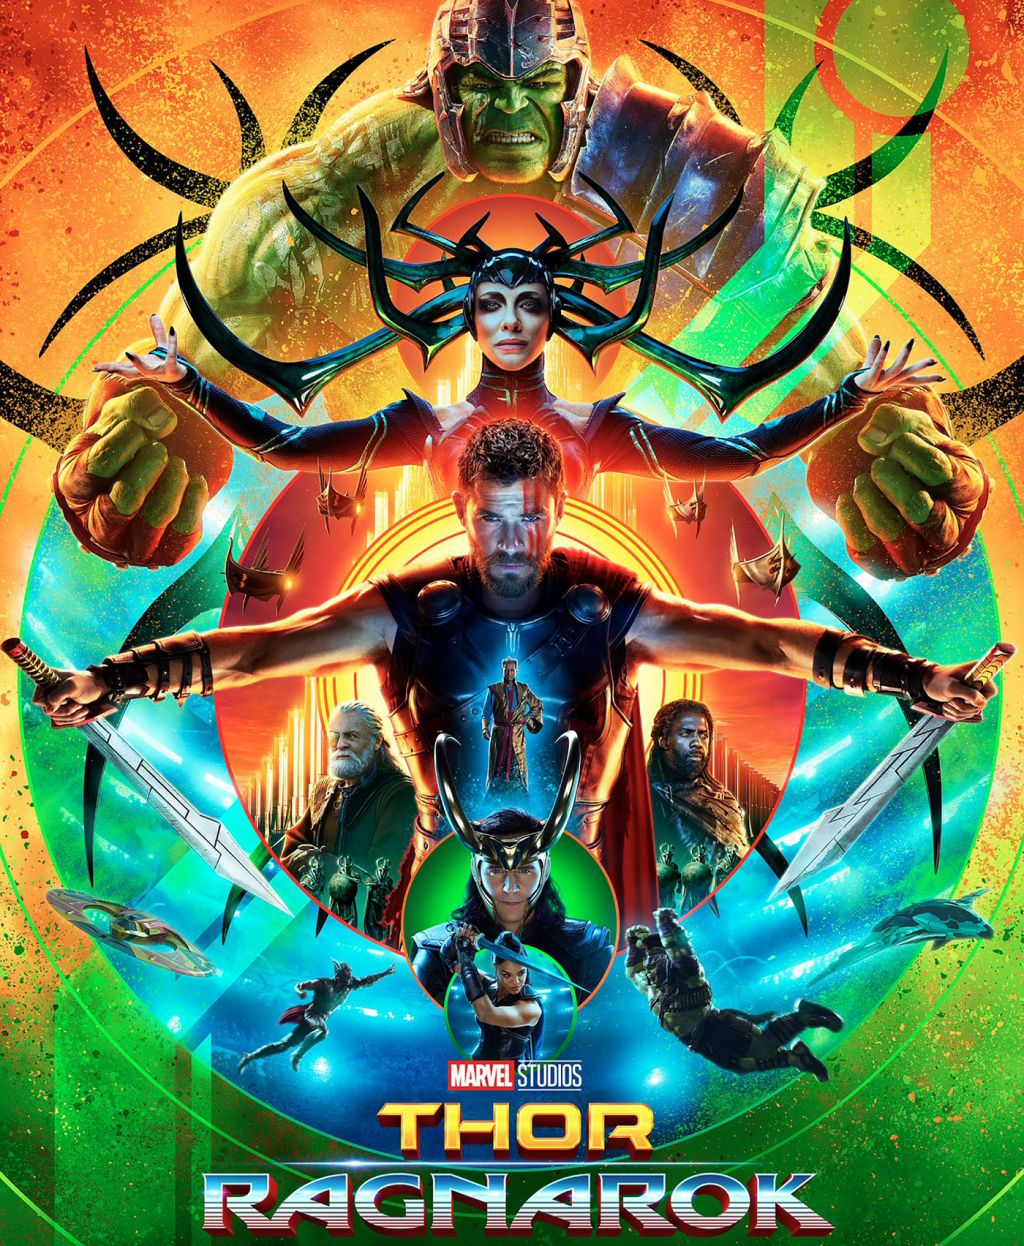 Thor: Ragnarok (2017) - Garreth Hirons joins Tim Worthington for a chat about the galaxy's most gambled on game of rock paper scissors in It's Good, Except It Sucks -  a movie by movie – and television series by television series – hurtle through the Marvel Cinematic Universe. 